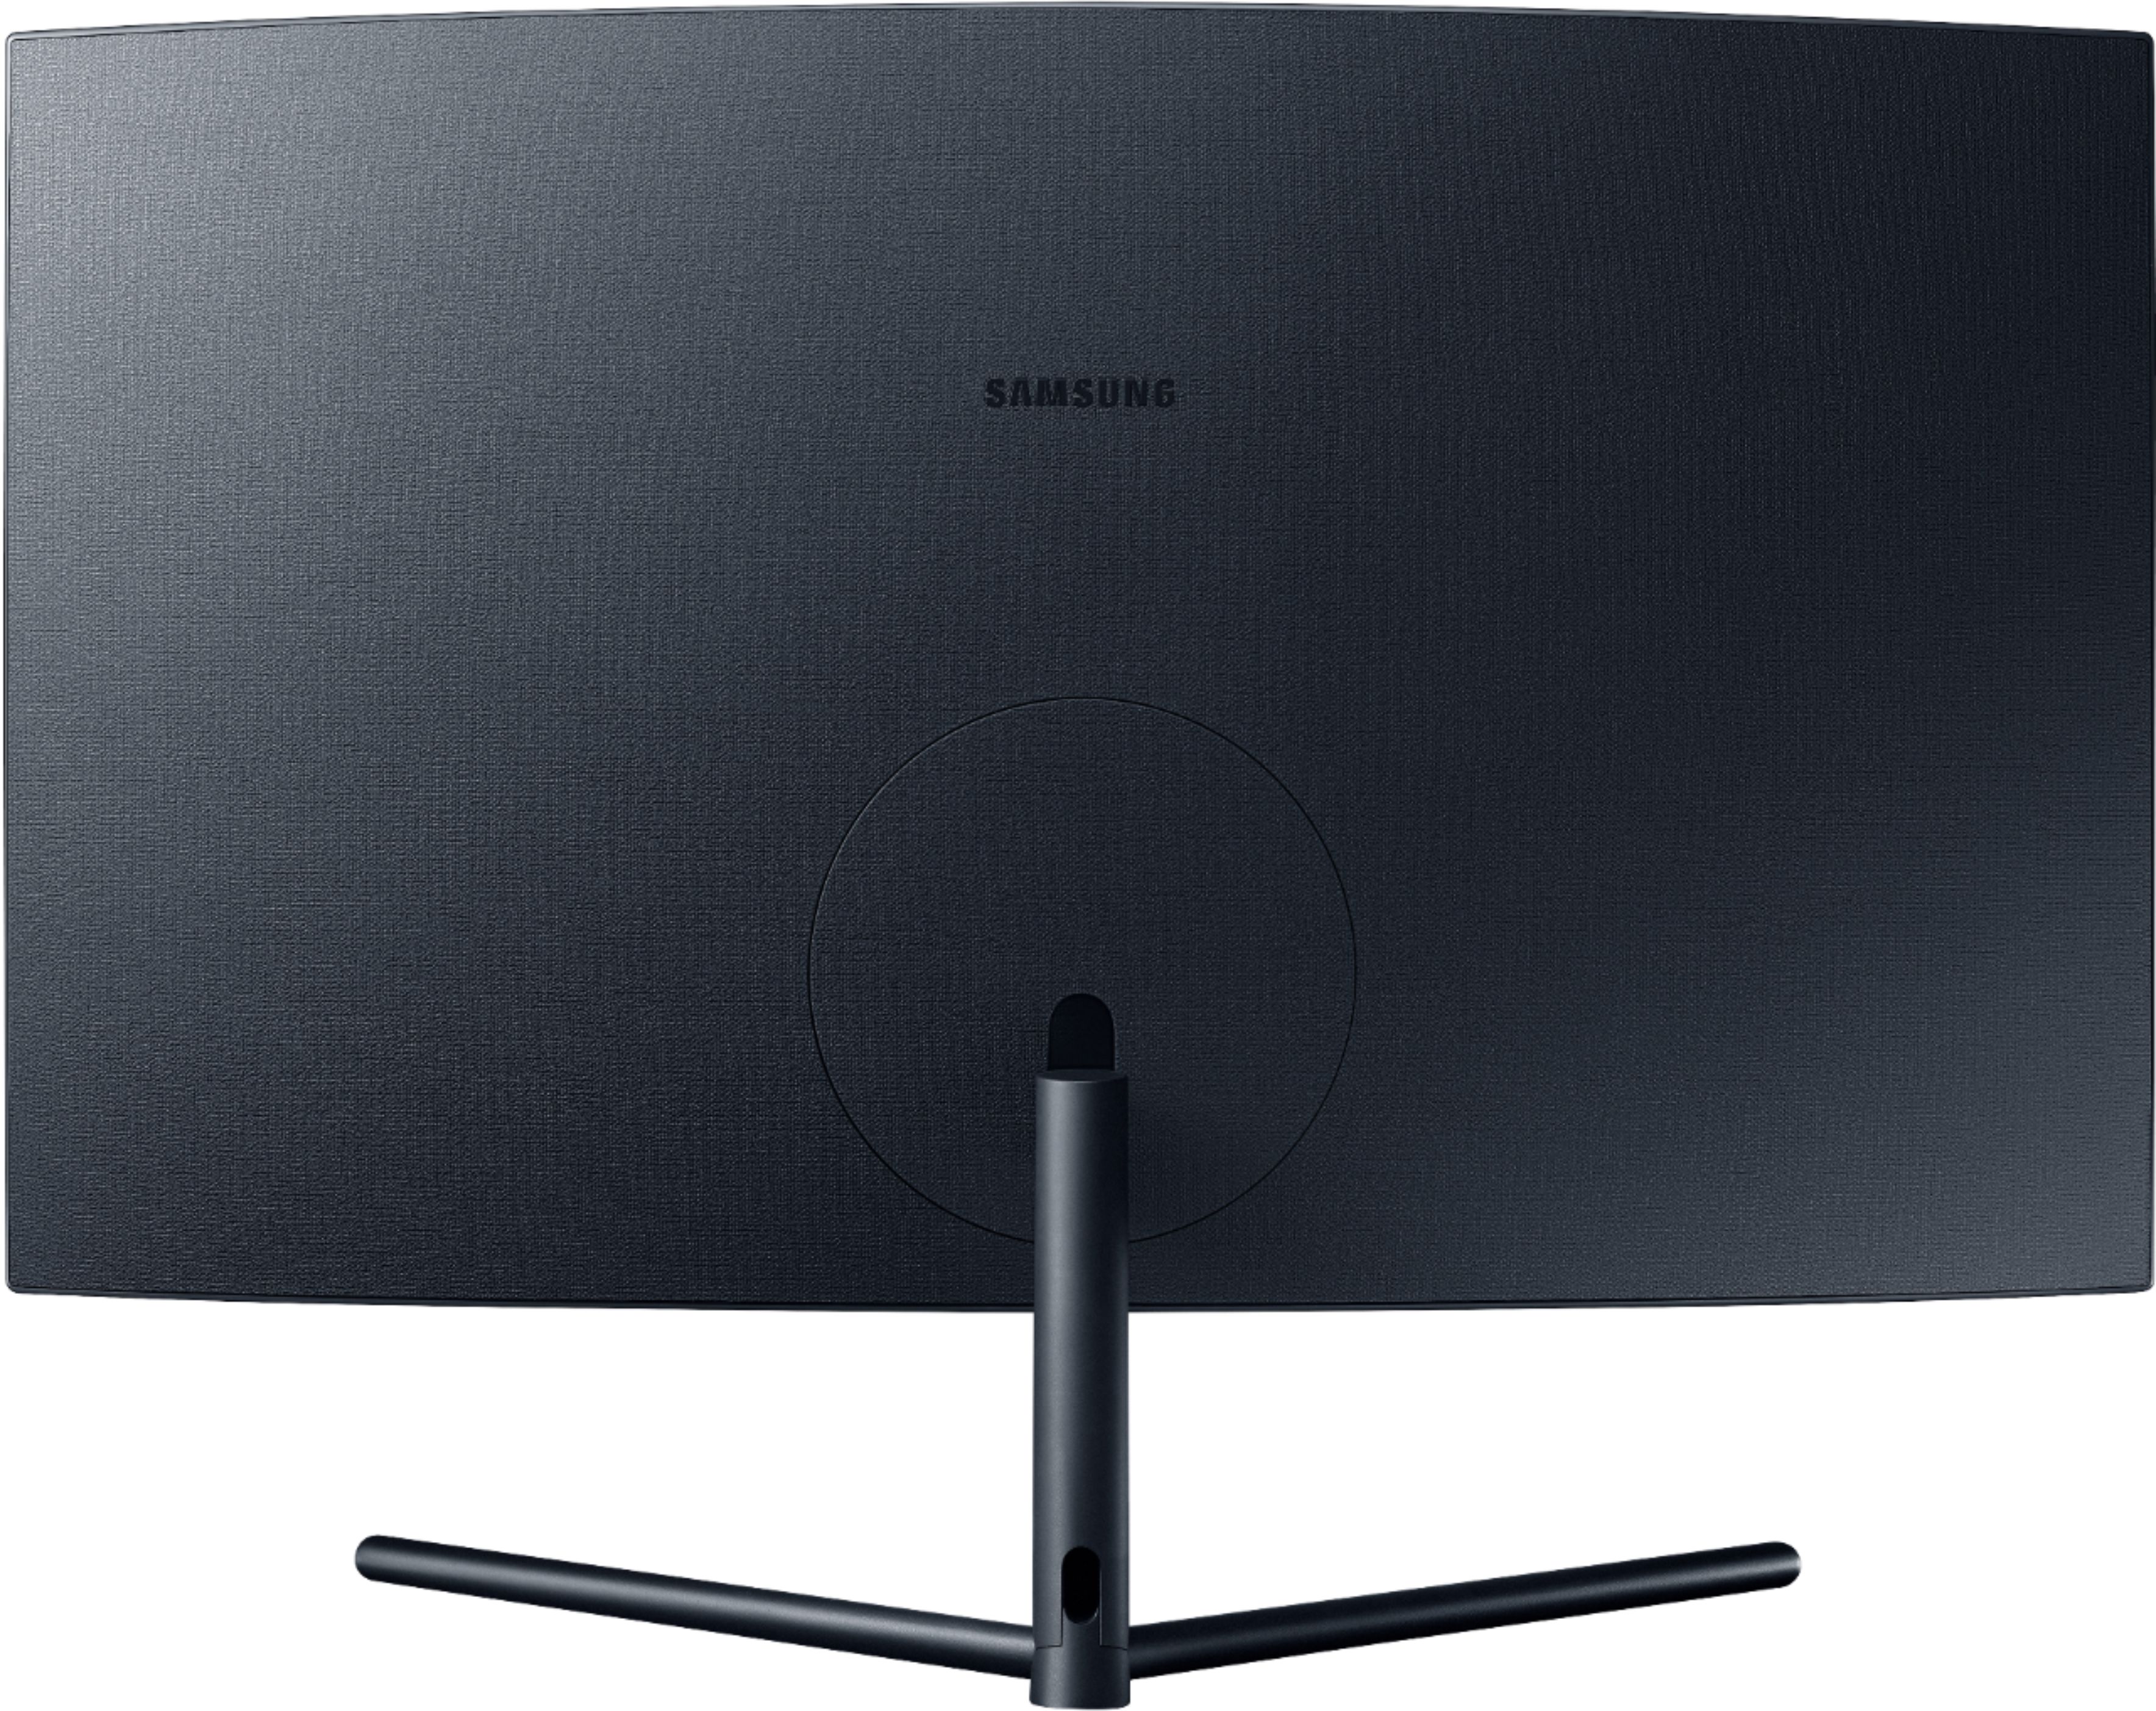 Back View: Philips - Brilliance 48.8 LCD Curved Monitor (DisplayPort USB, HDMI) - Textured Black